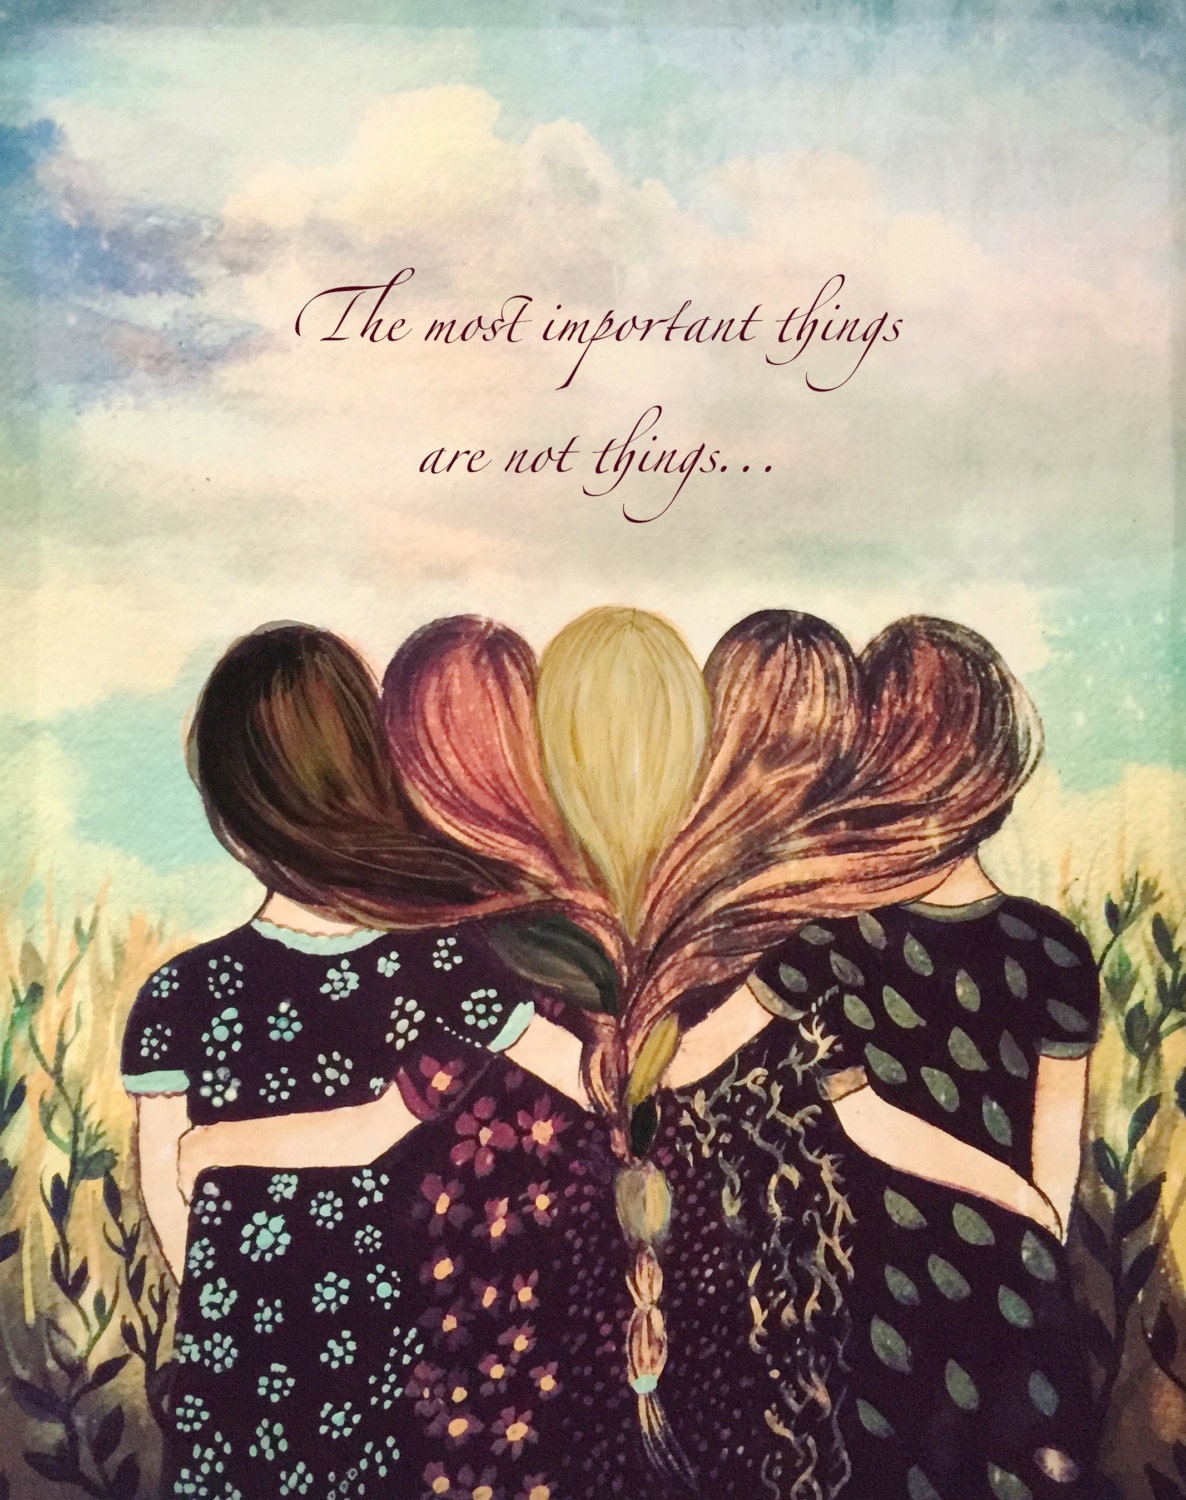 Five Sisters Best Friends With Brown and Reddish Hair Art - Etsy